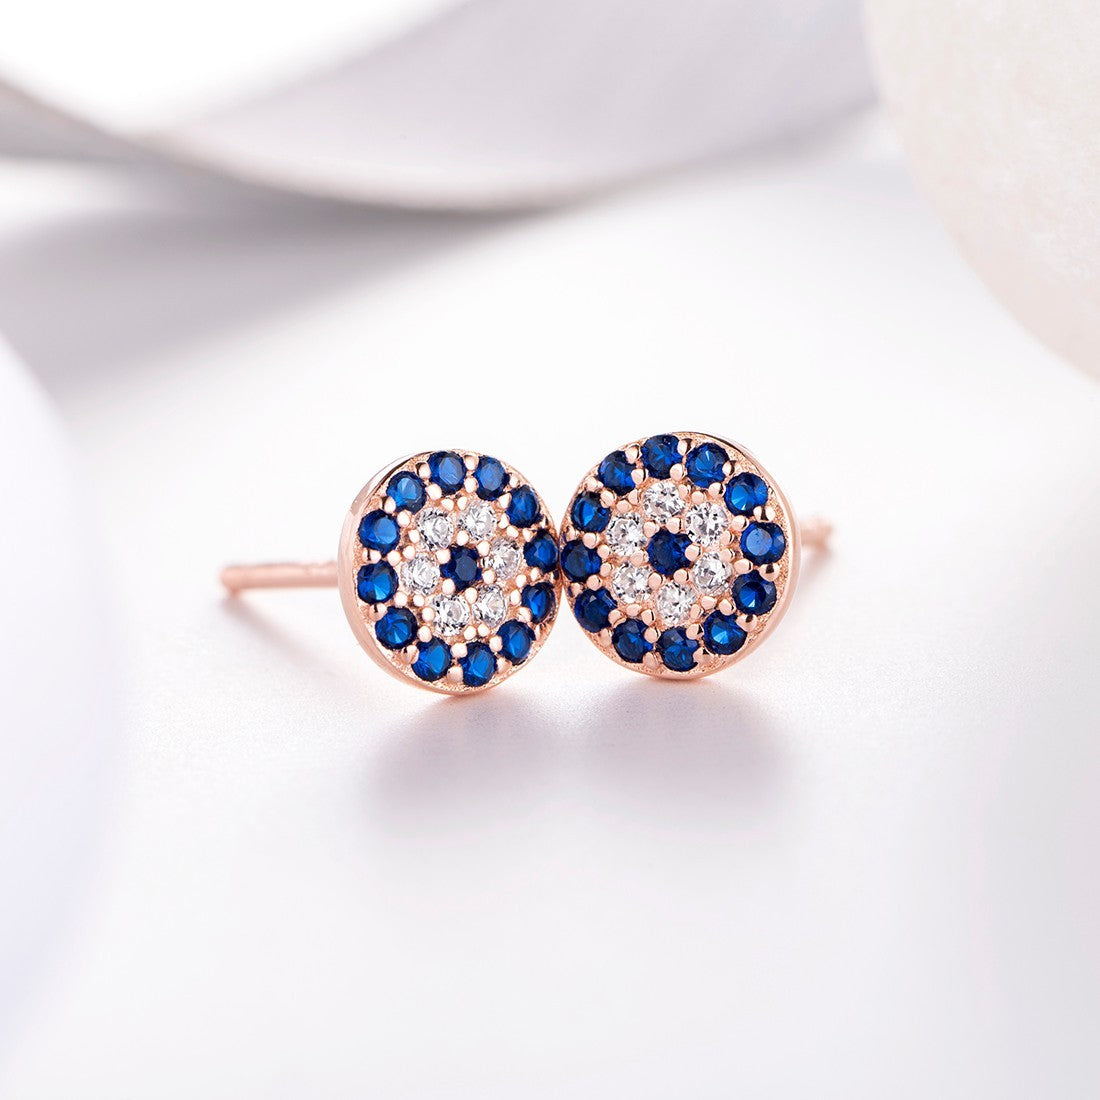 Circular CZ Studded Rose Gold Plated 925 Sterling Silver Earrings